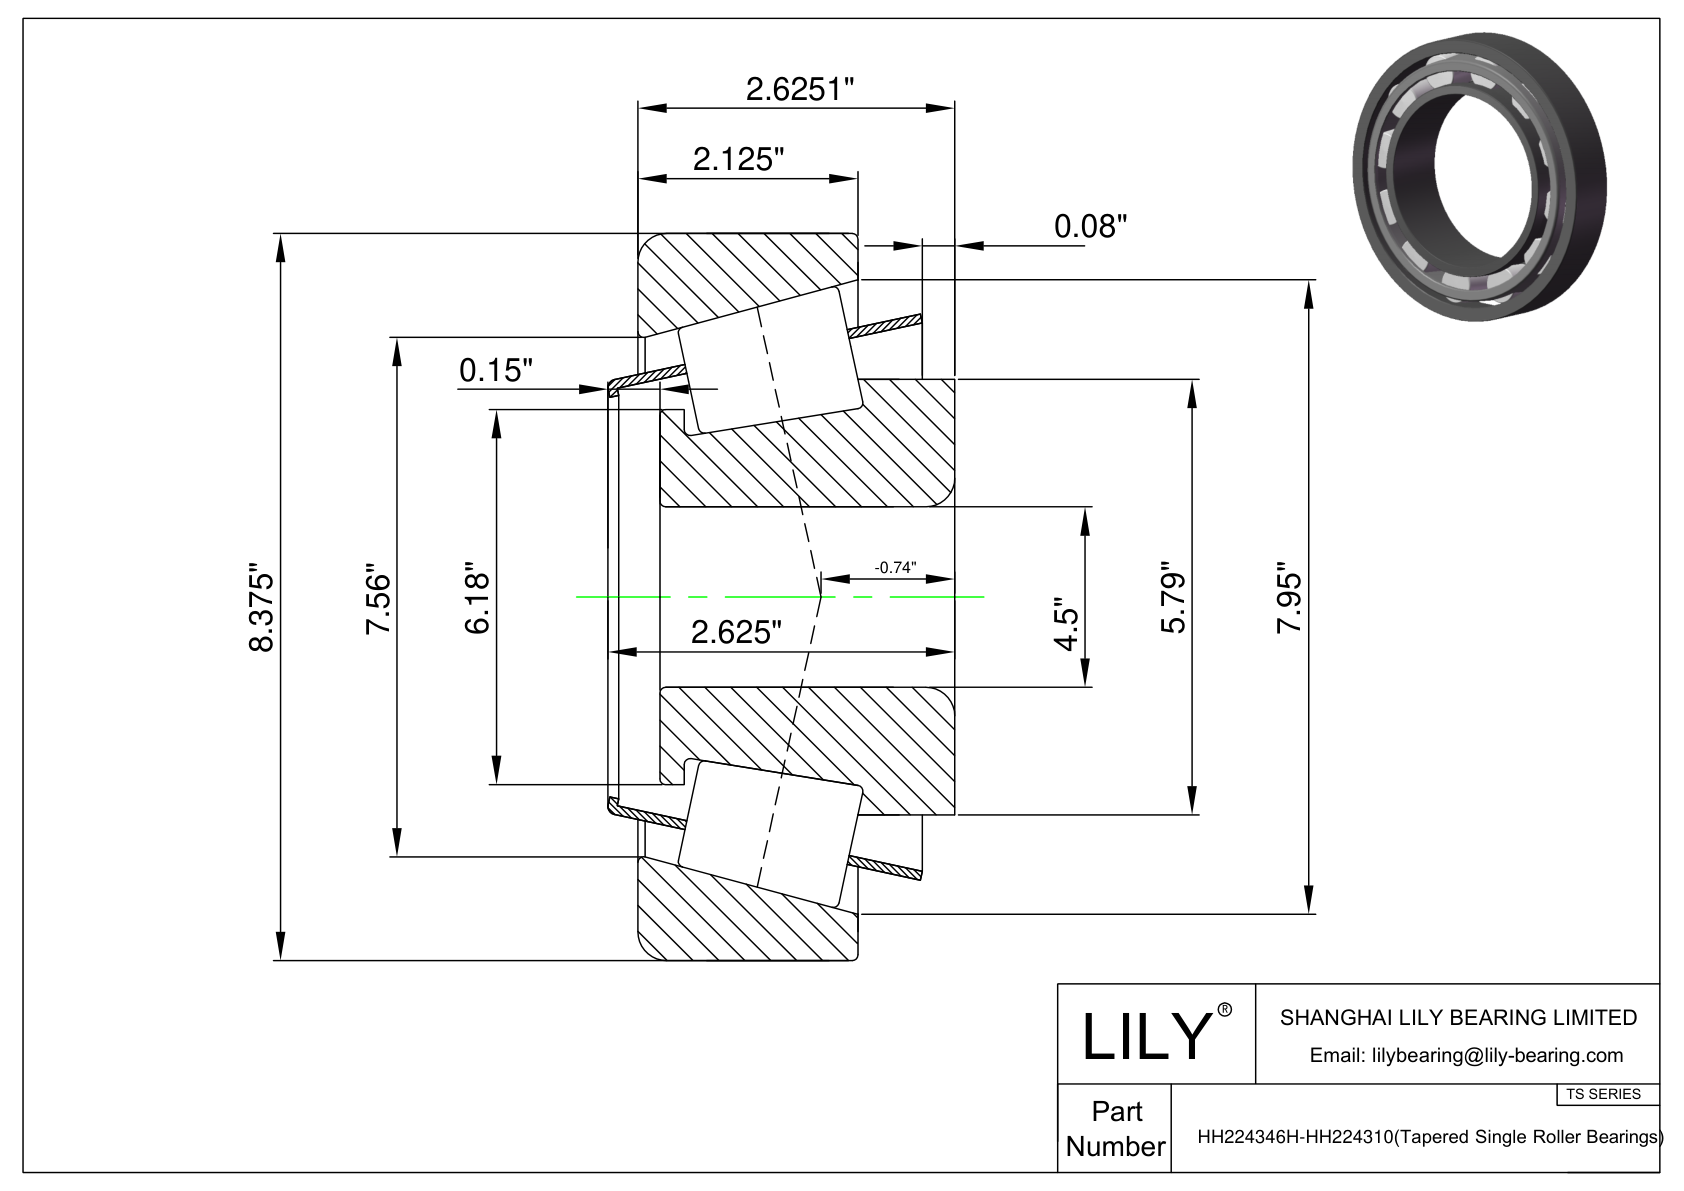 HH224346H-HH224310 TS (Tapered Single Roller Bearings) (Imperial) cad drawing